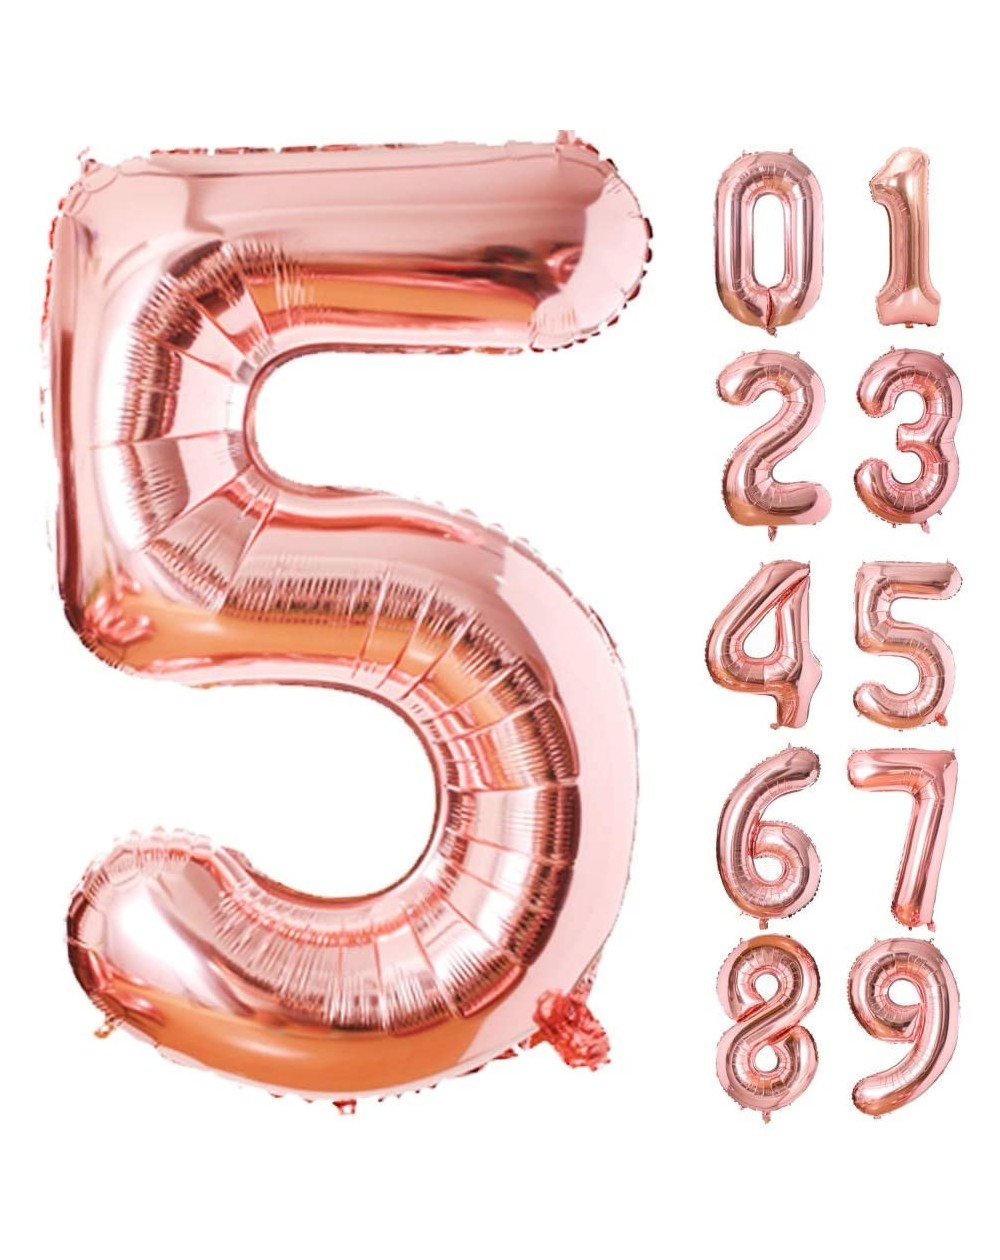 Balloons 40 Inch Rose Gold Number Foil Balloons 0-9 Balloons- Foil Mylar Big Number 5 Digital Balloons for Rose Gold Birthday...